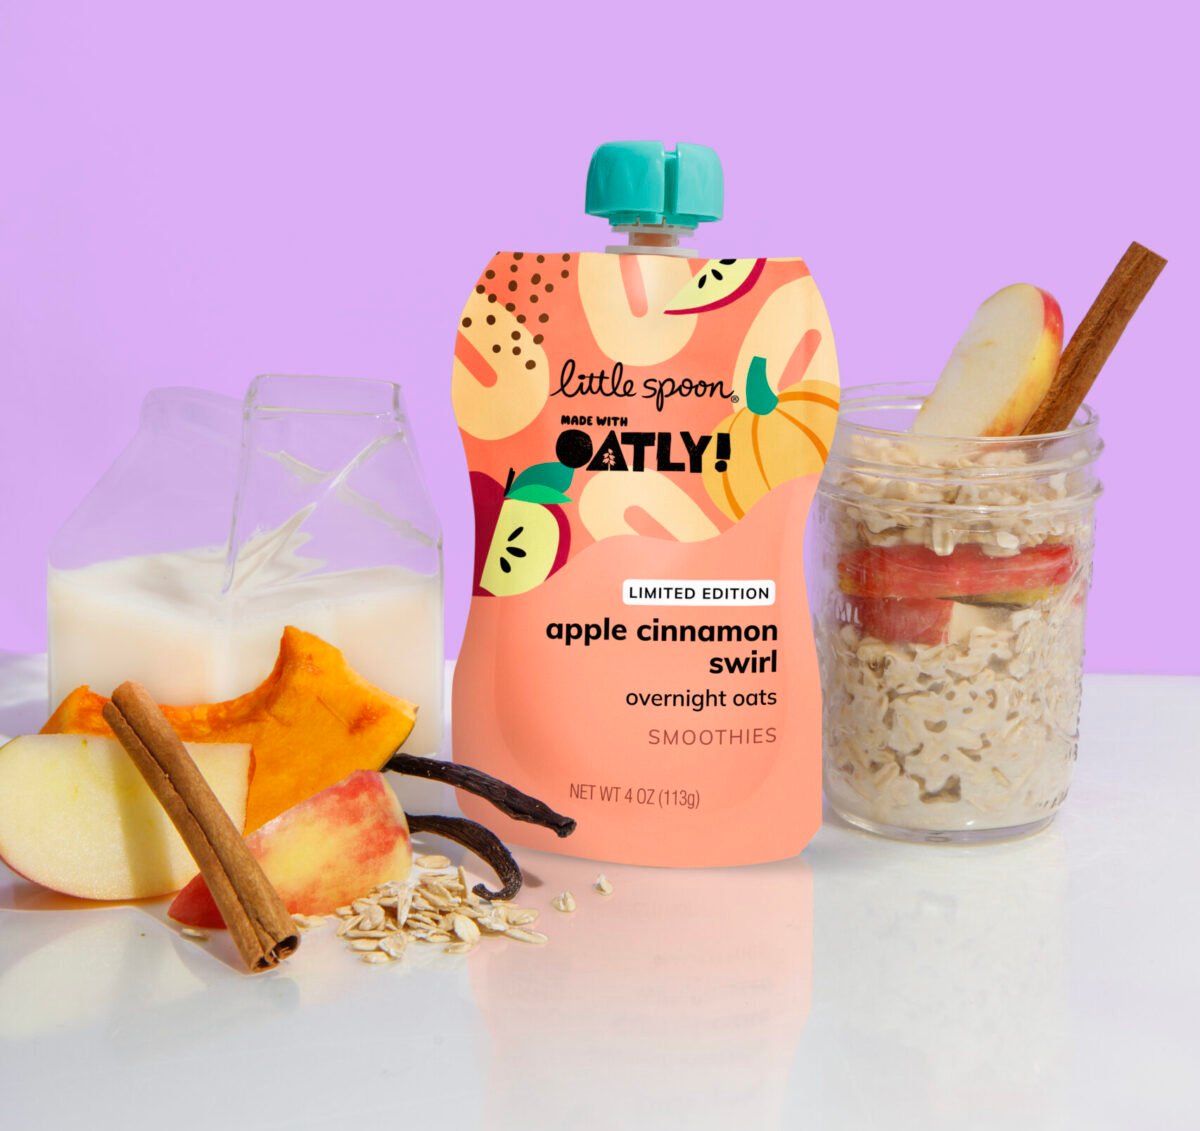 Photo shows one of the new flavors of Overnight Oat-style smoothies from Little Spoon x Oatly, Apple Cinnamon Swirl